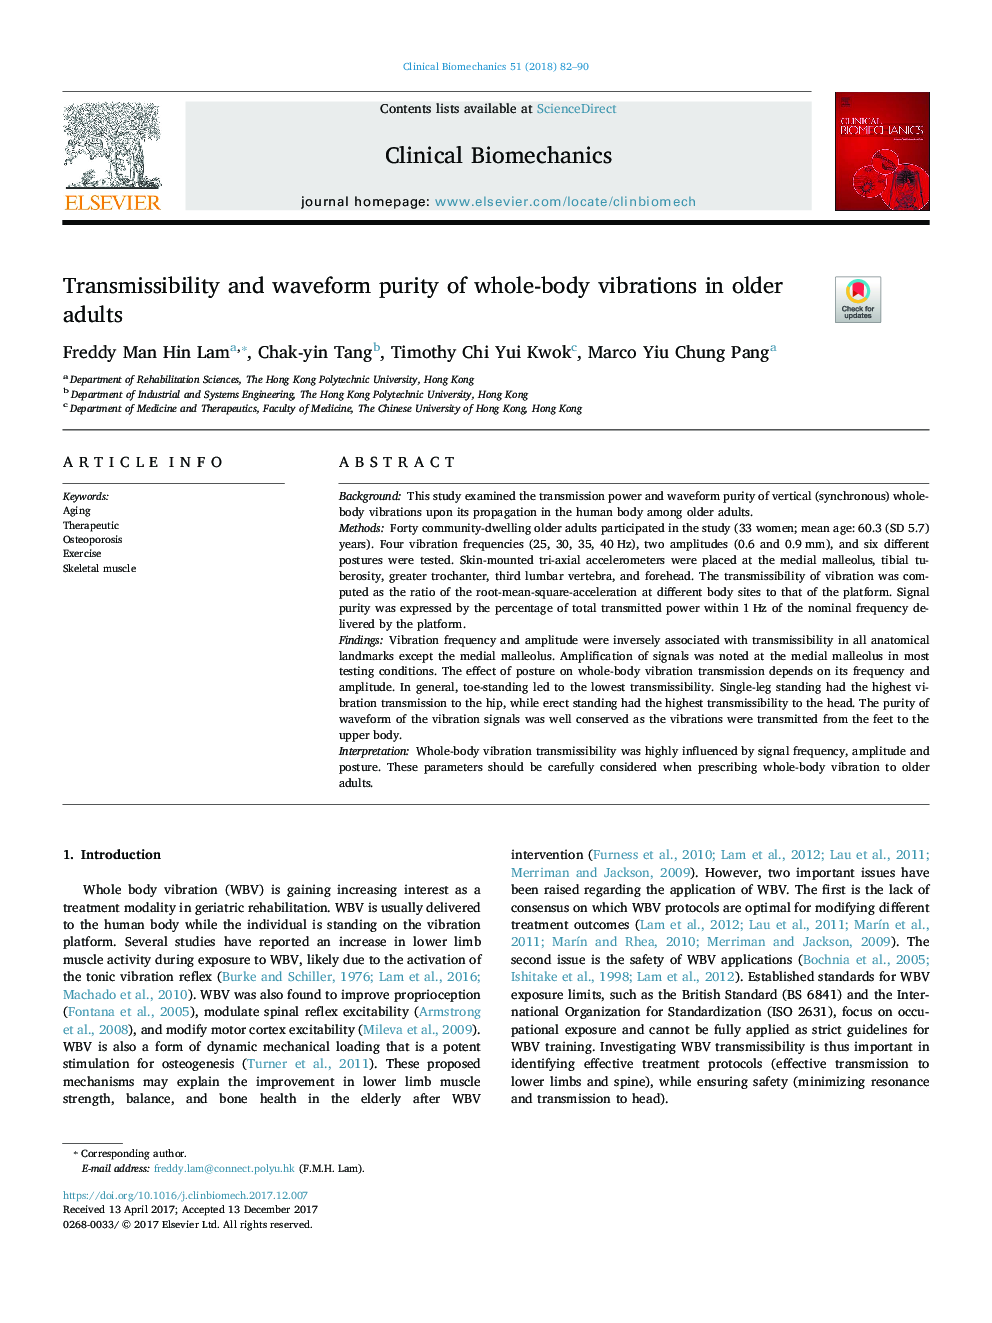 Transmissibility and waveform purity of whole-body vibrations in older adults